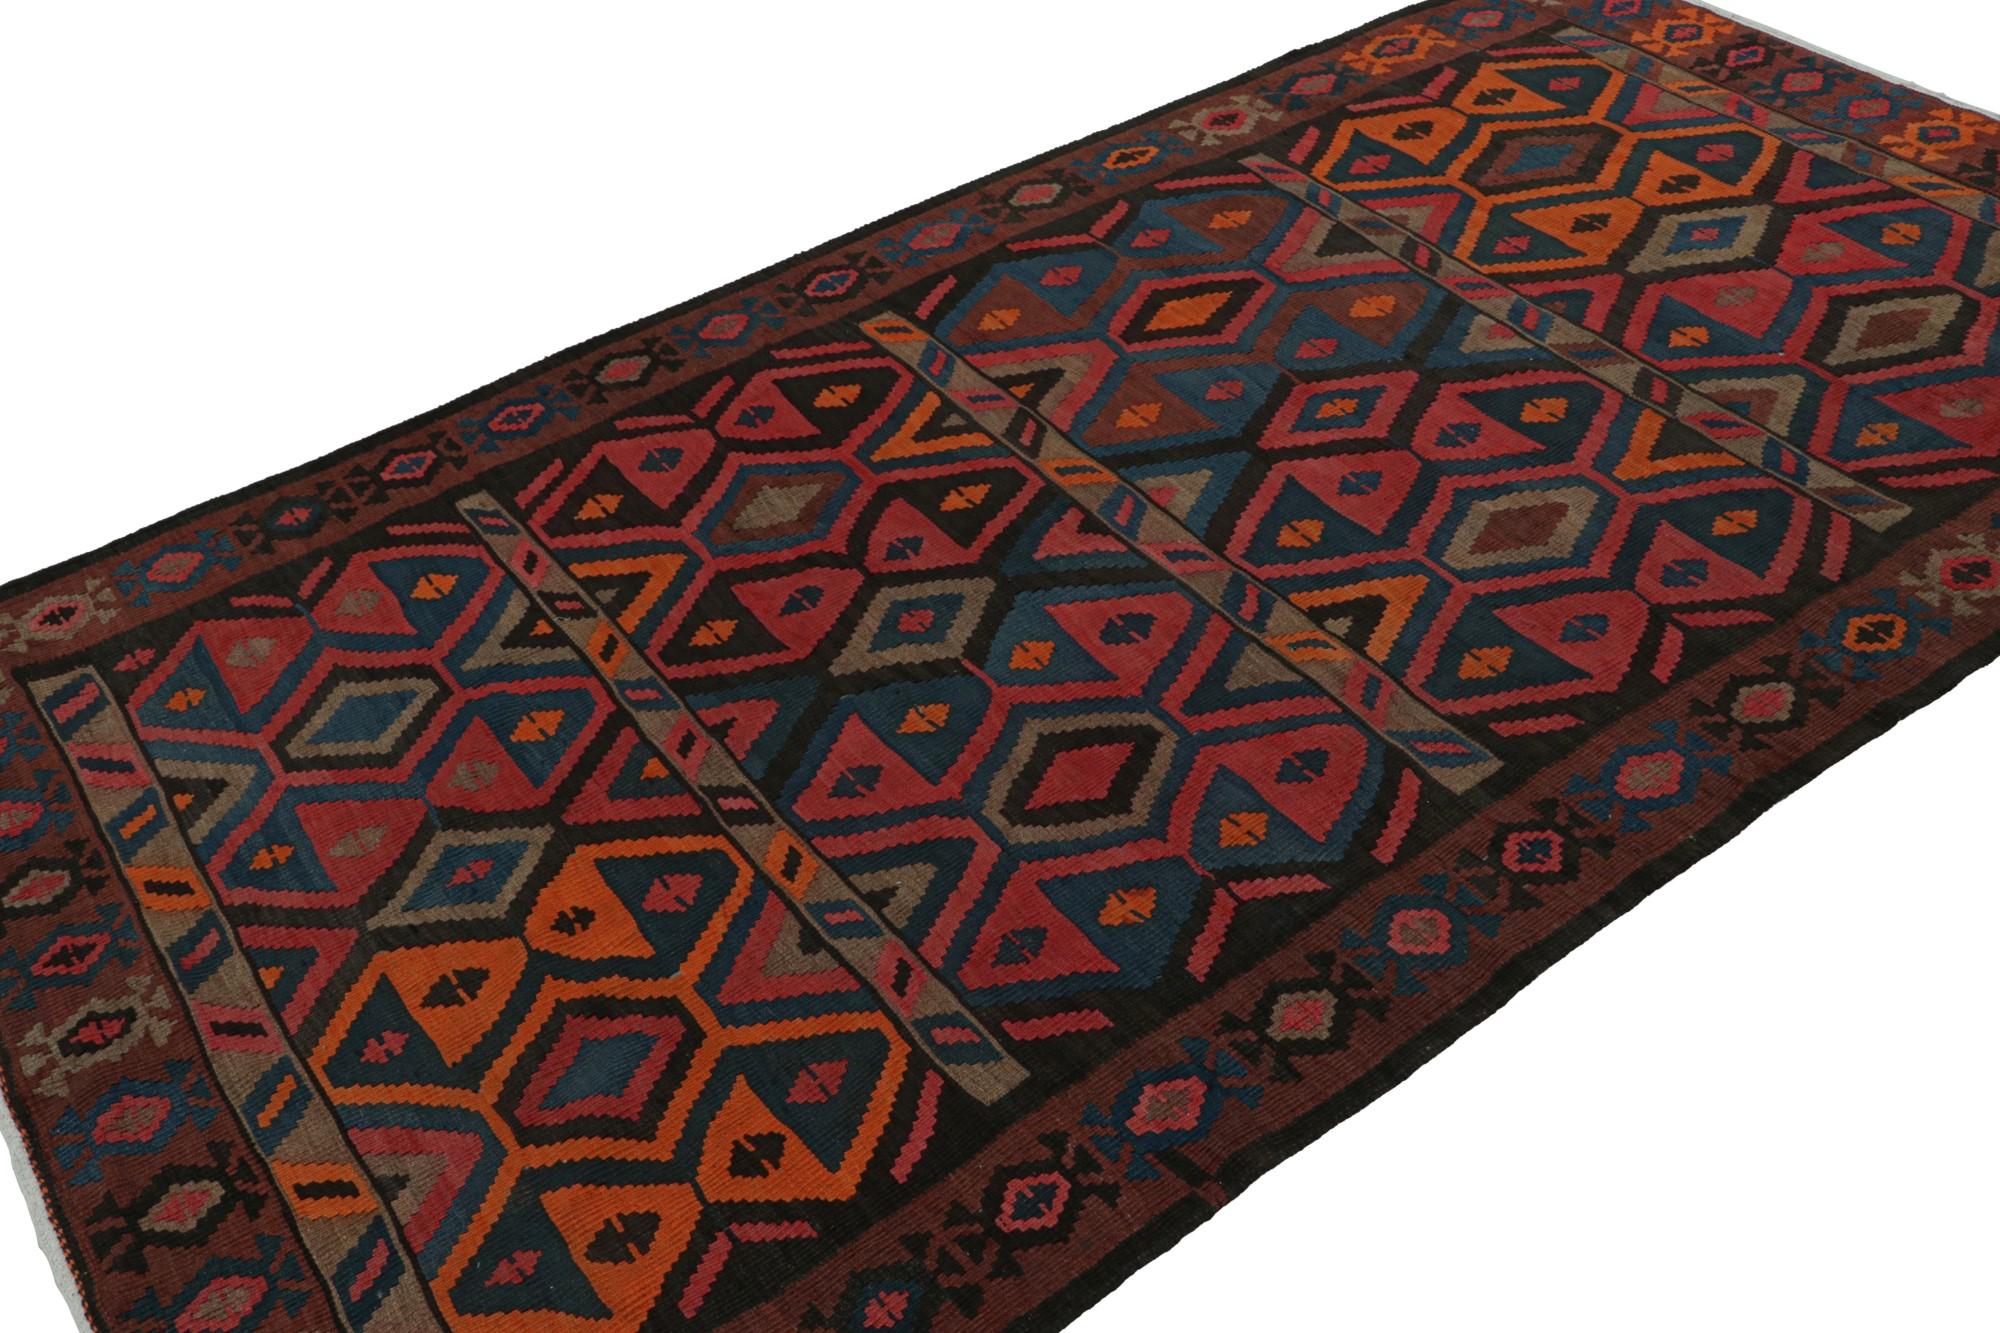 Hand knotted in wool, this 5x9 vintage Afghan tribal kilim rug is an extraordinarily simple piece with all over geometric patterns in red, orange, blue and brown, and a simple presence. 

On the Design: 

This flatweave prefers all over geometric